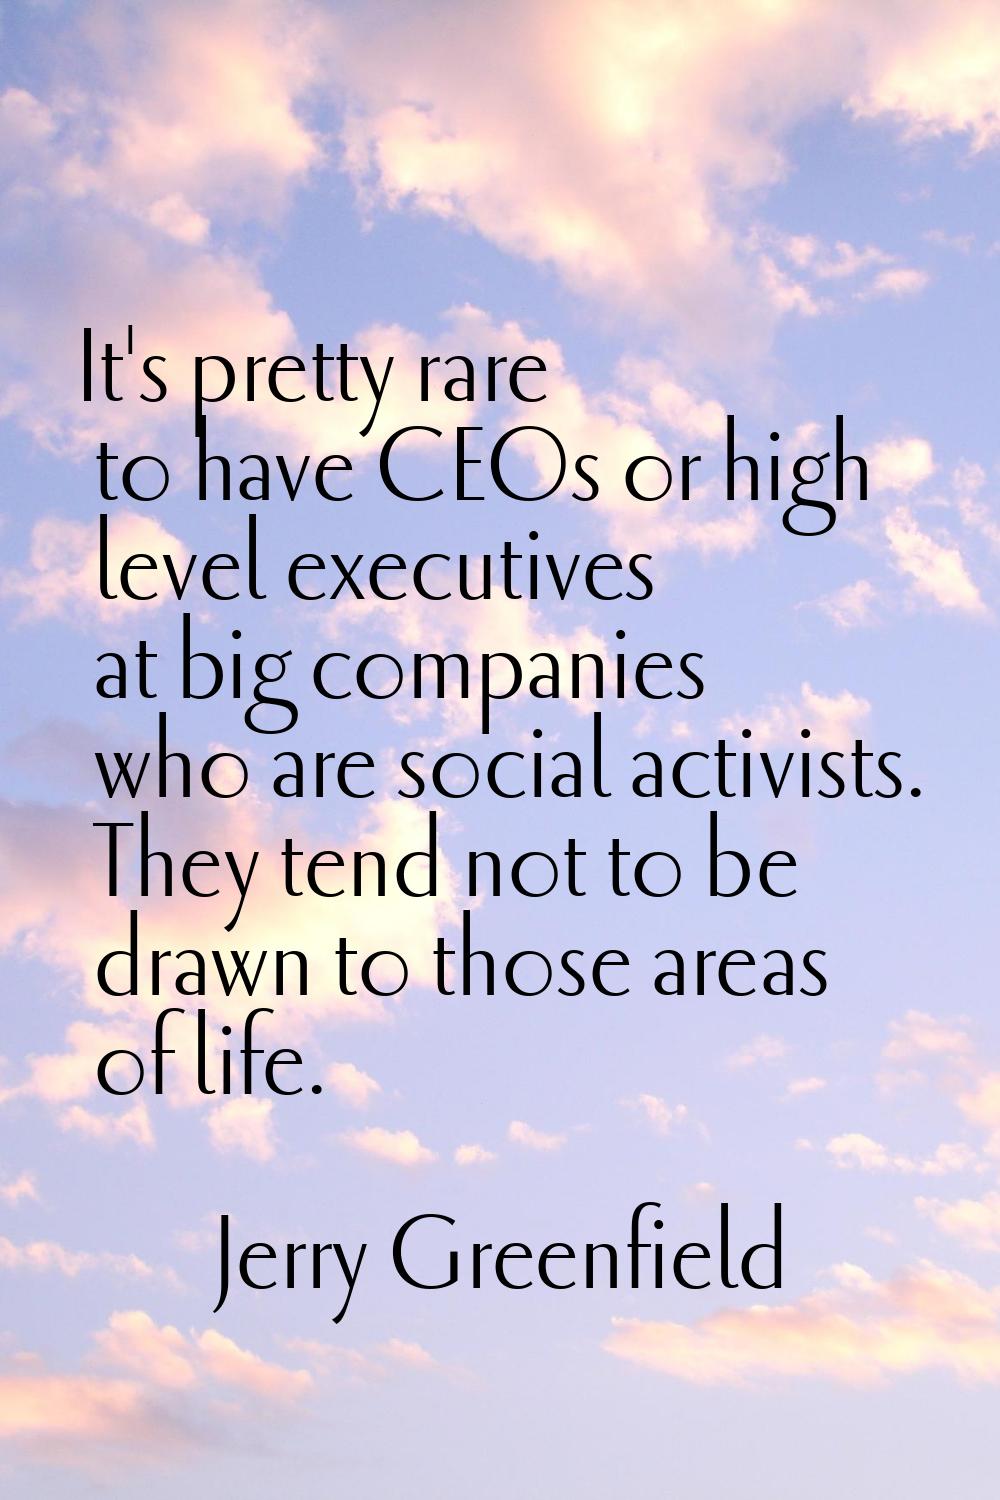 It's pretty rare to have CEOs or high level executives at big companies who are social activists. T